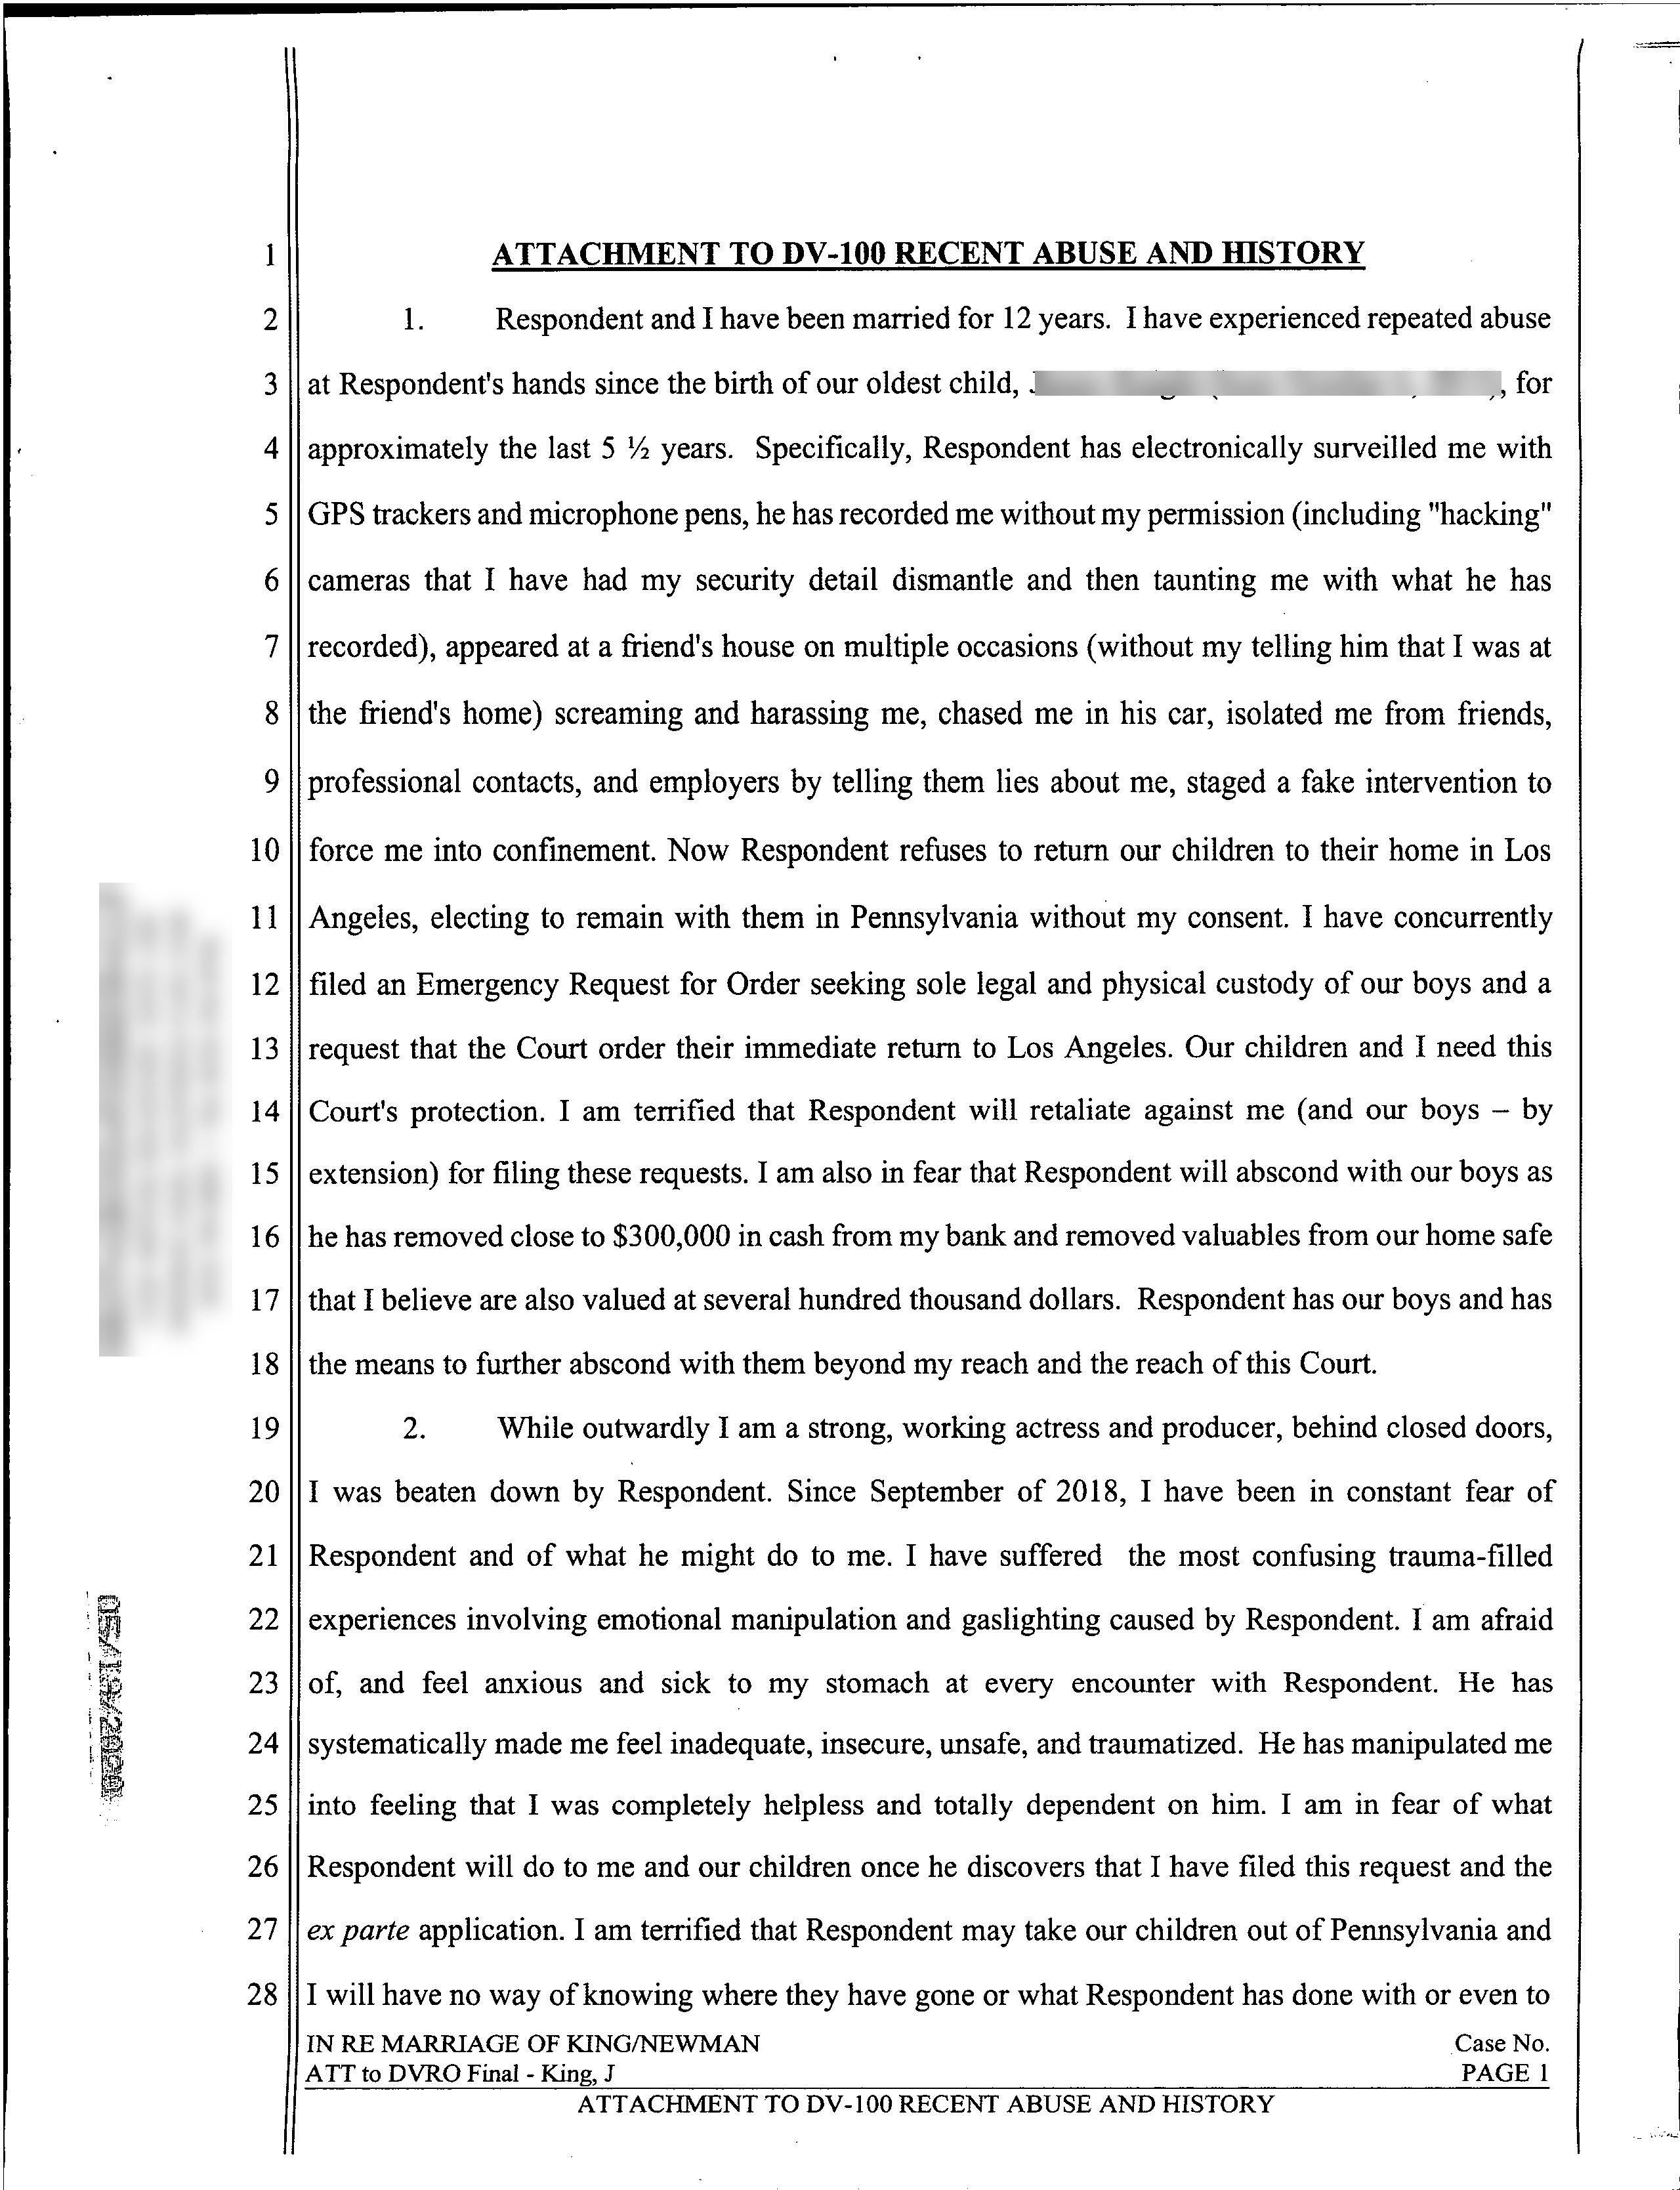 Page one of Jaime King's declaration